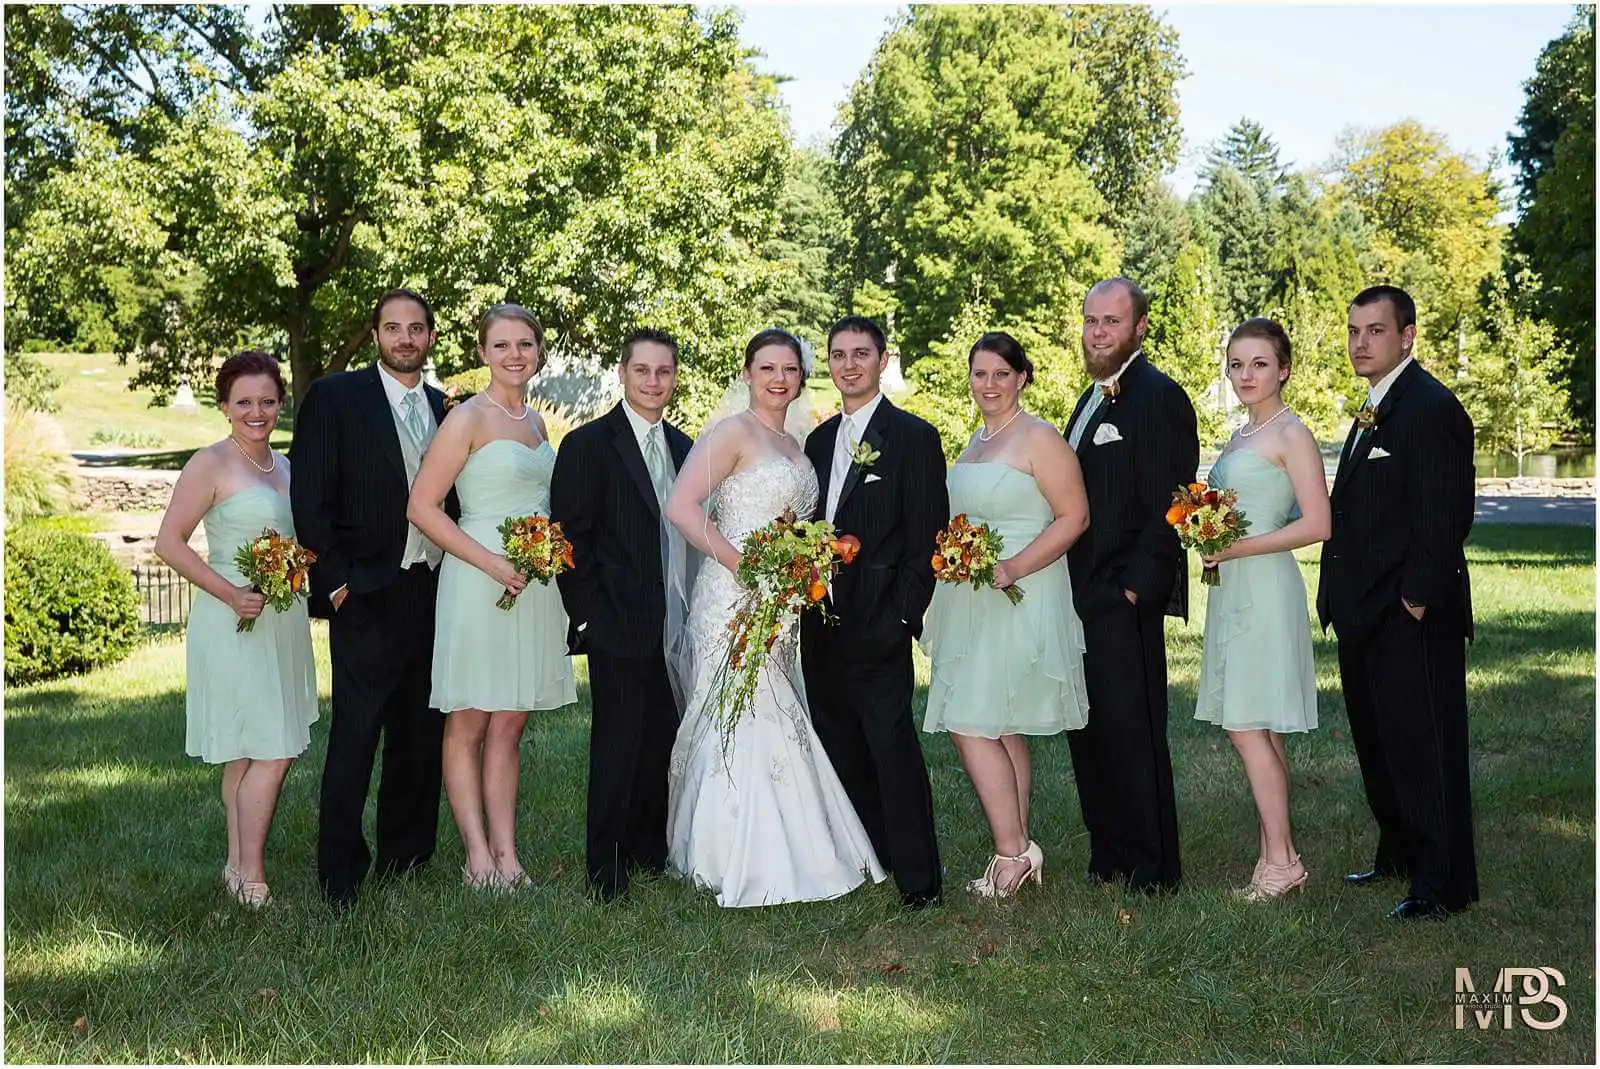 Outdoor wedding party posing in formal attire on a sunny day.